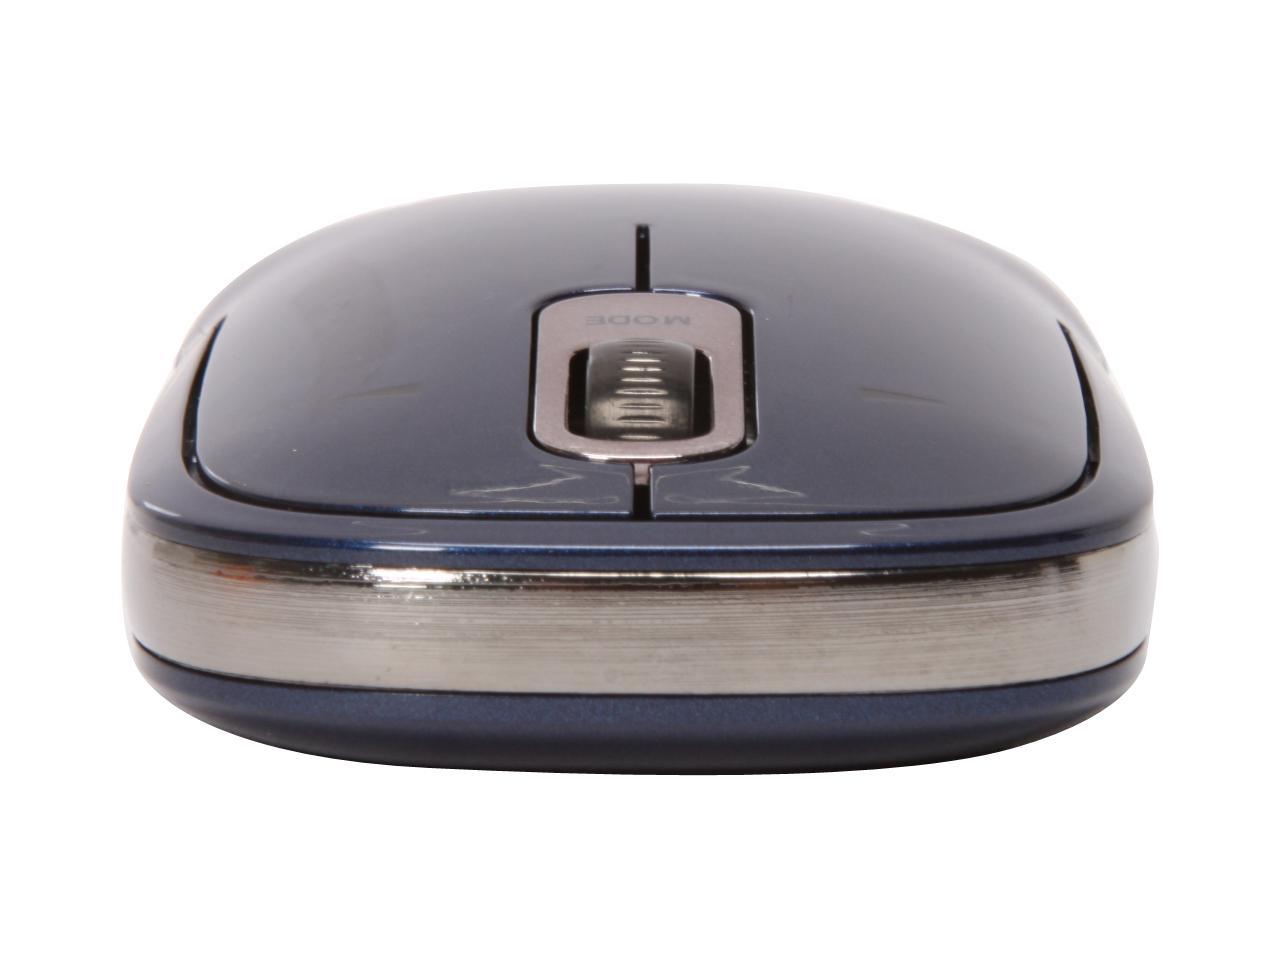 K72285US Deep Blue Wireless Mouse and Presenter in One Kensington SlimBlade Presenter Mouse 